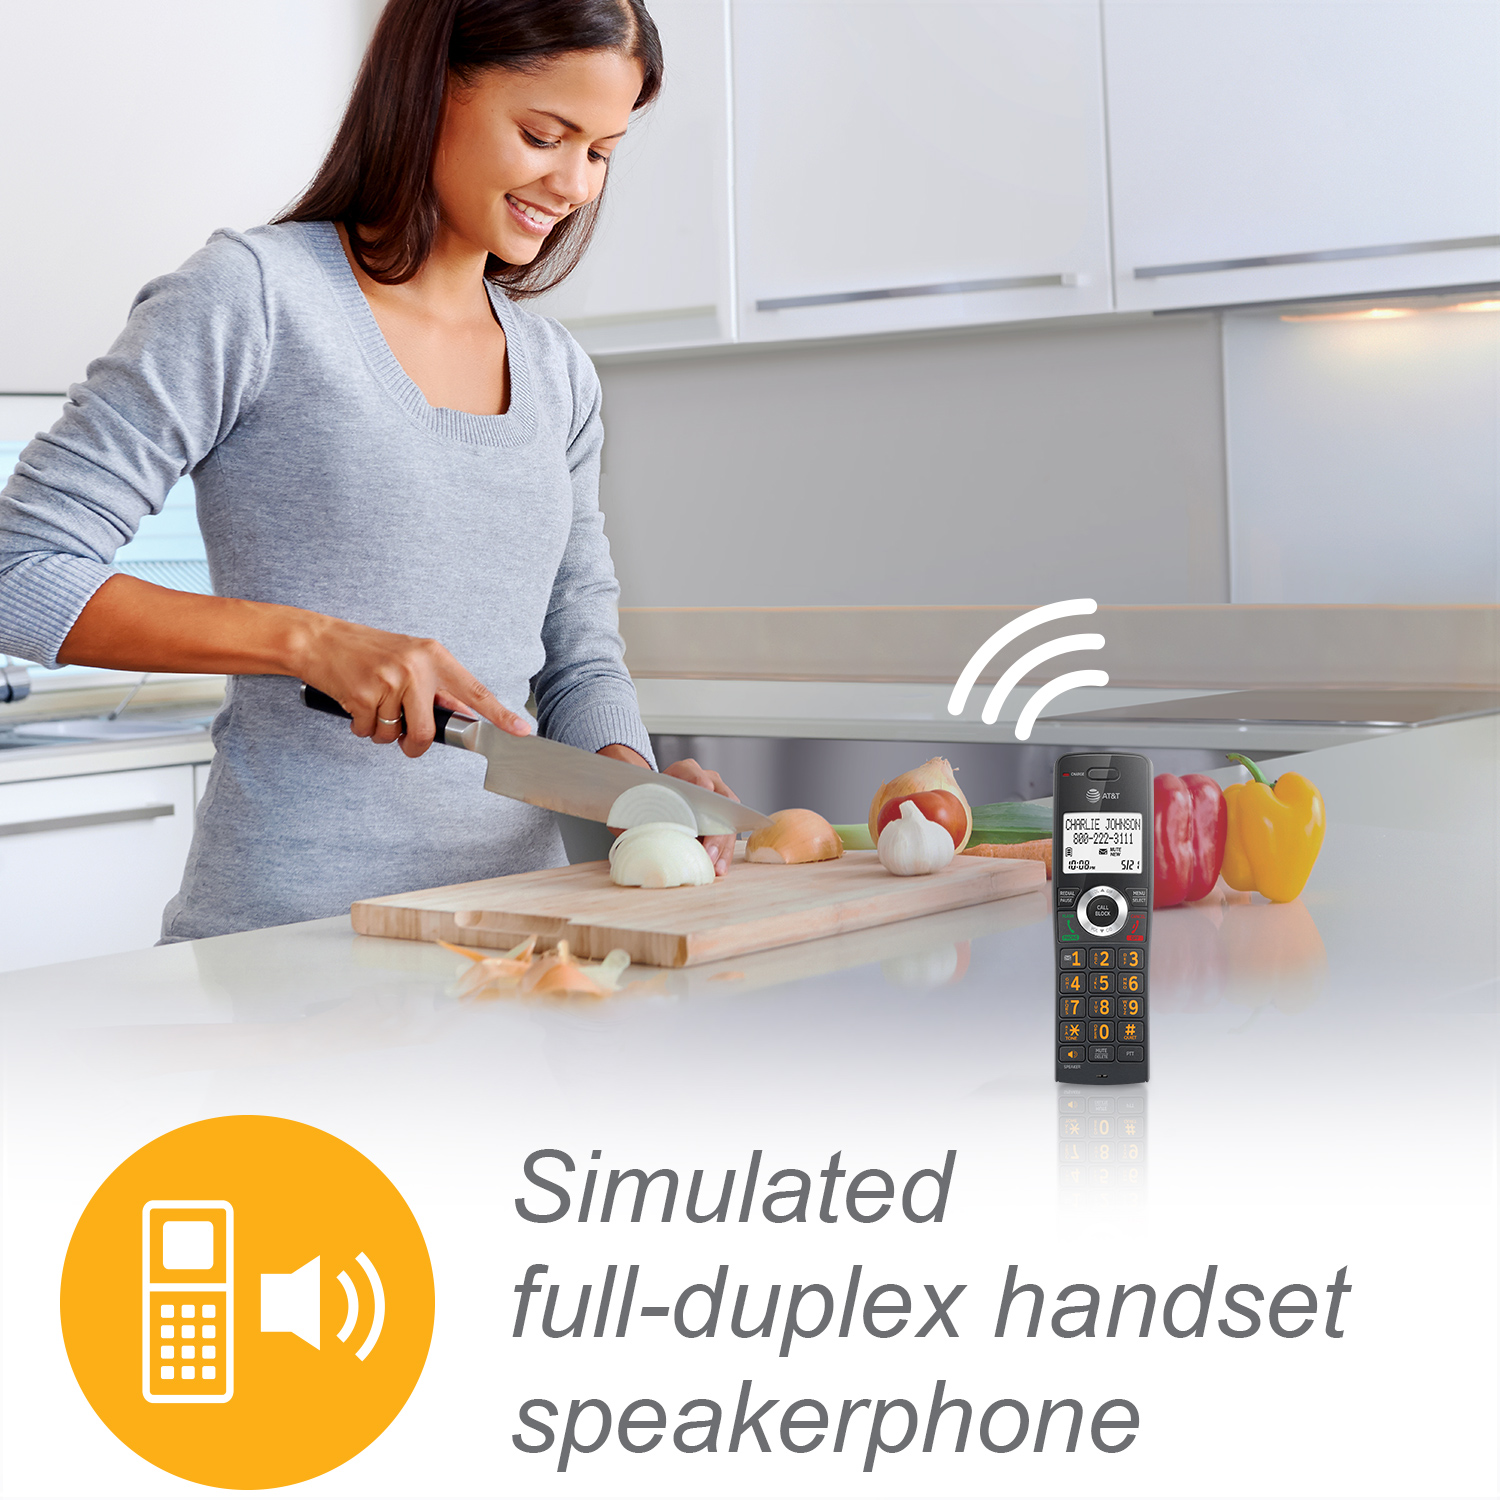 3-Handset Expandable Cordless Phone with Unsurpassed Range, Smart Call Blocker and Answering System - view 9